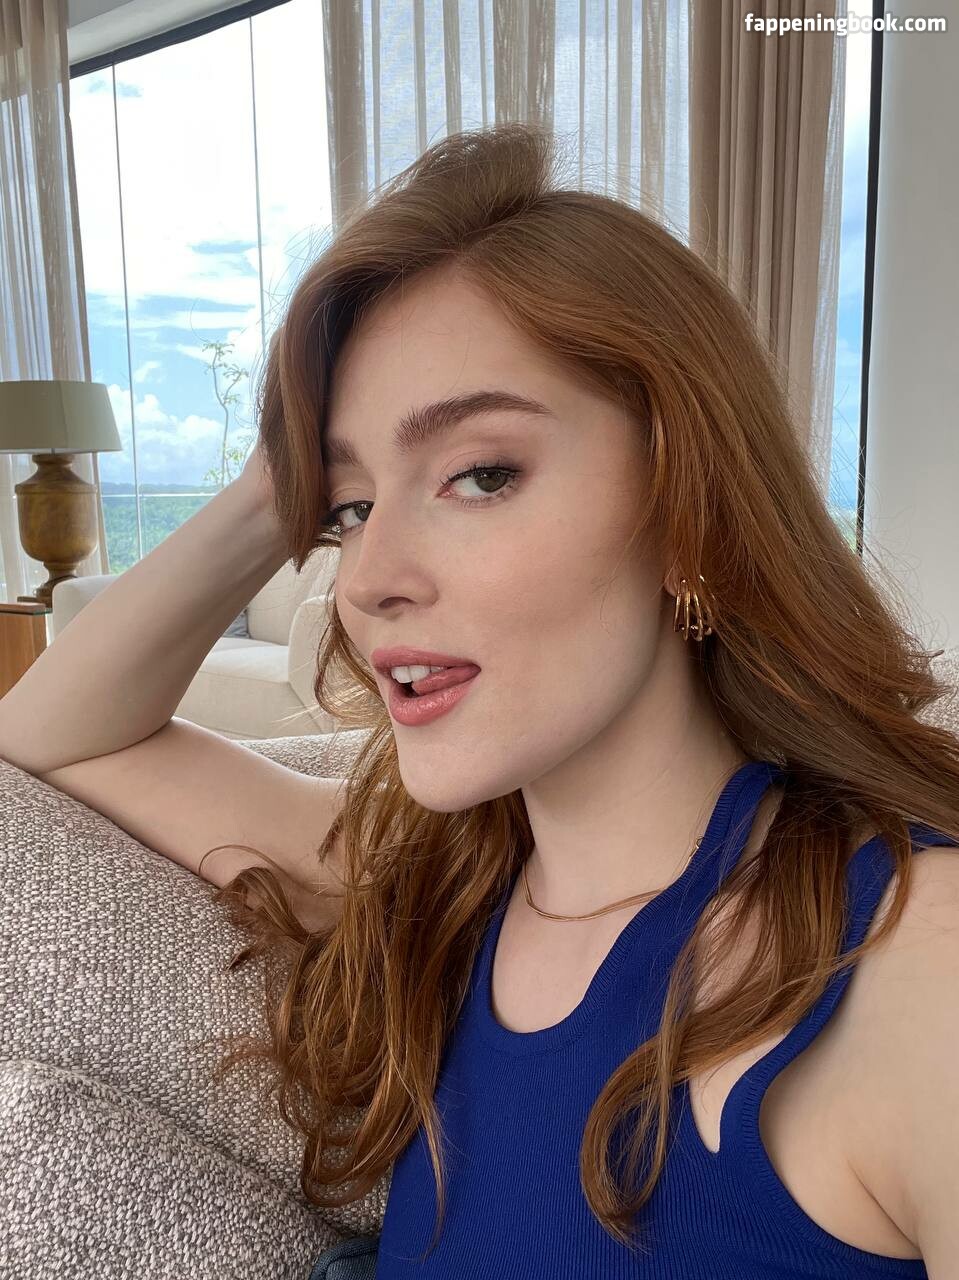 Jia Lissa Jia Lissa Nude Onlyfans Leaks The Fappening Photo 6038817 Fappeningbook